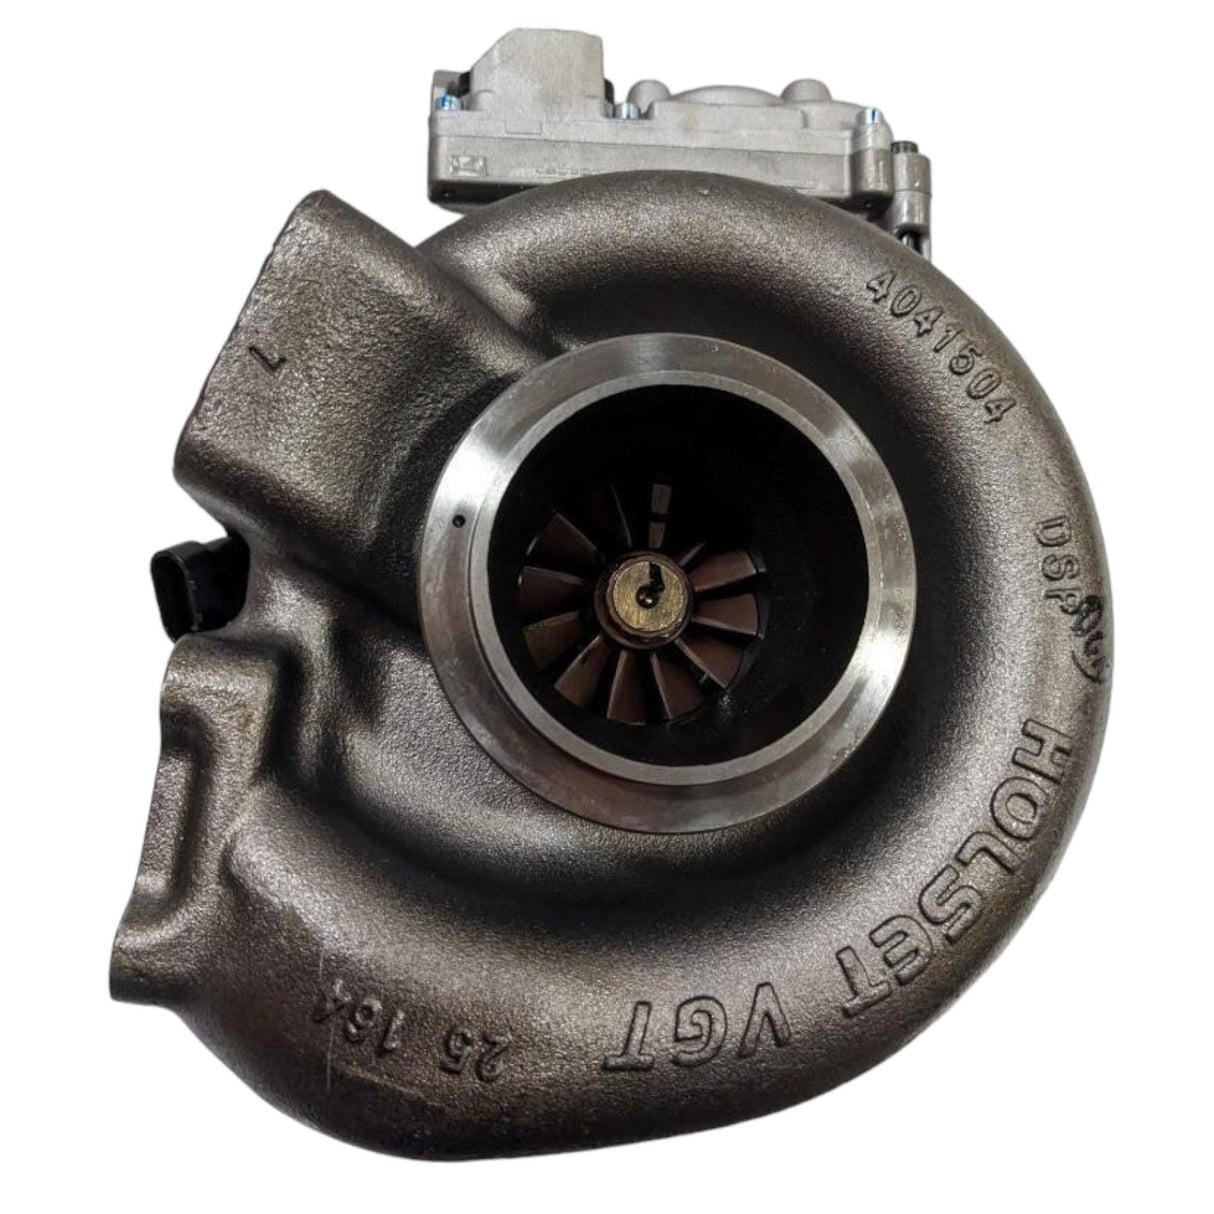 R8321377Aa Oem Mopar Turbocharger With Actuator He300Vg For Dodge 6.7